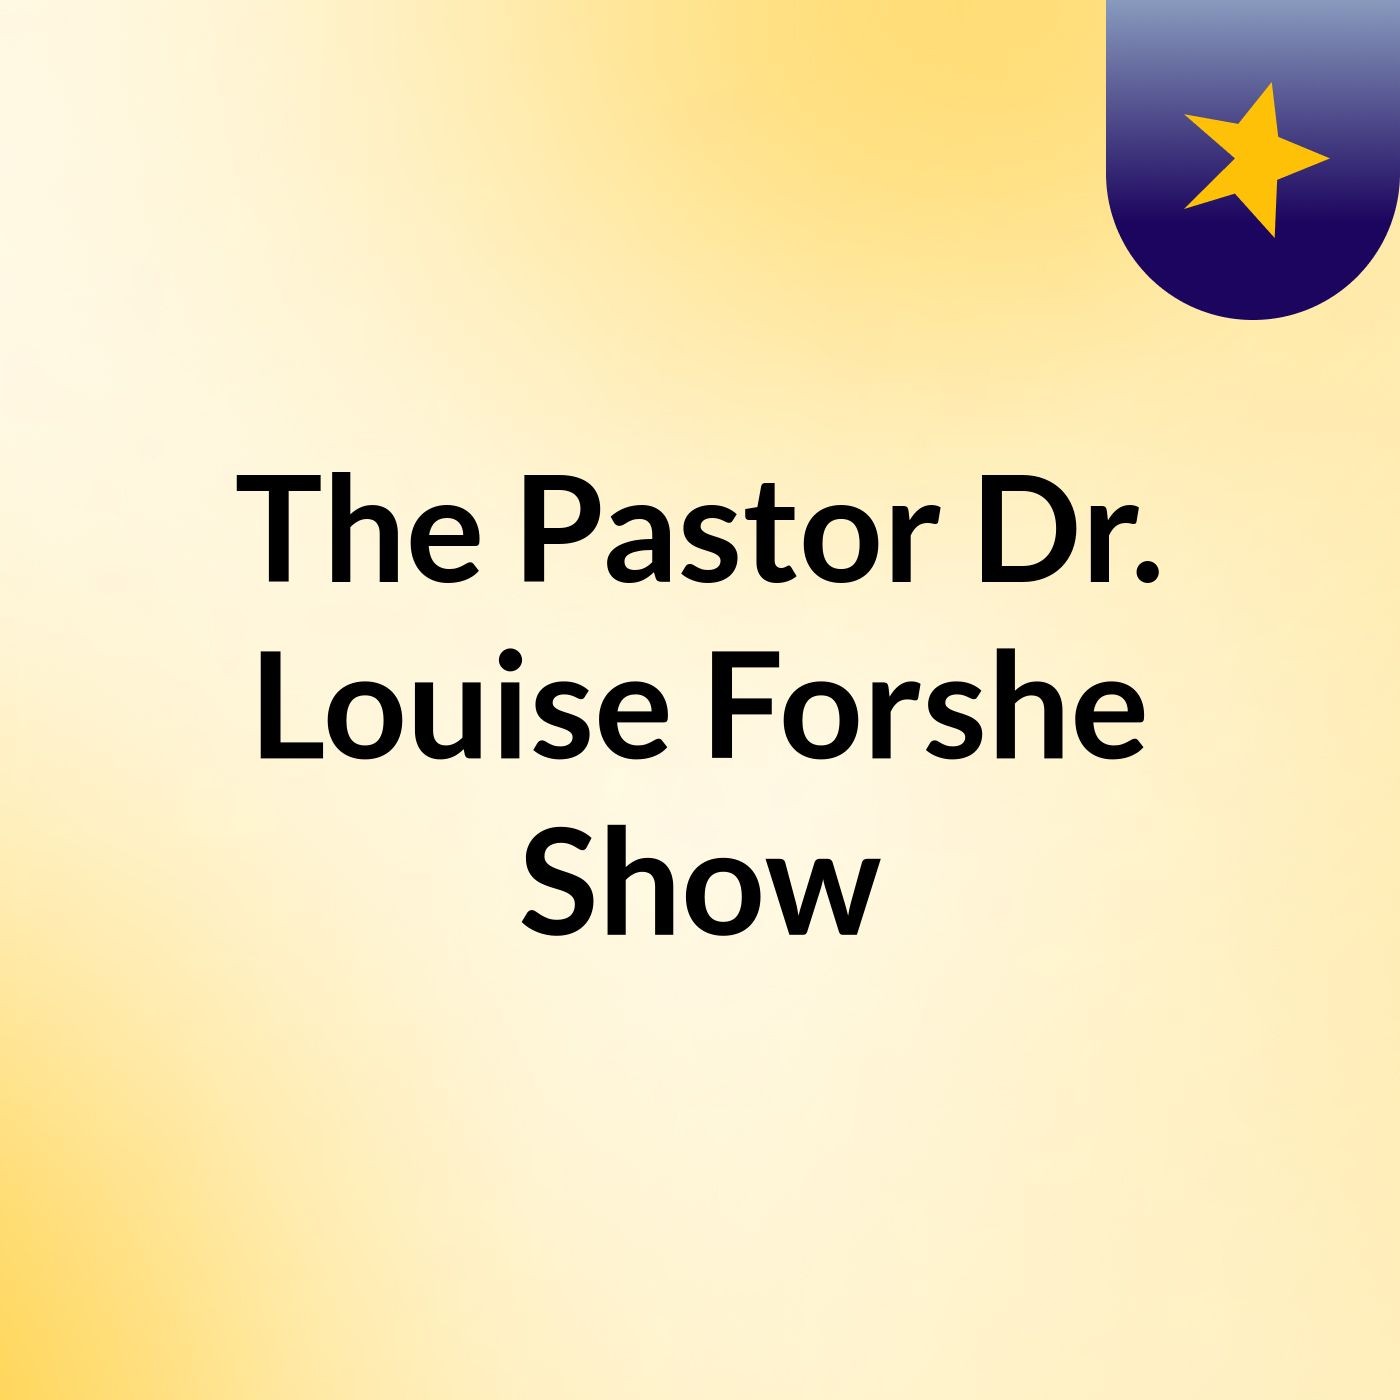 The Pastor Dr. Louise Forshe Show